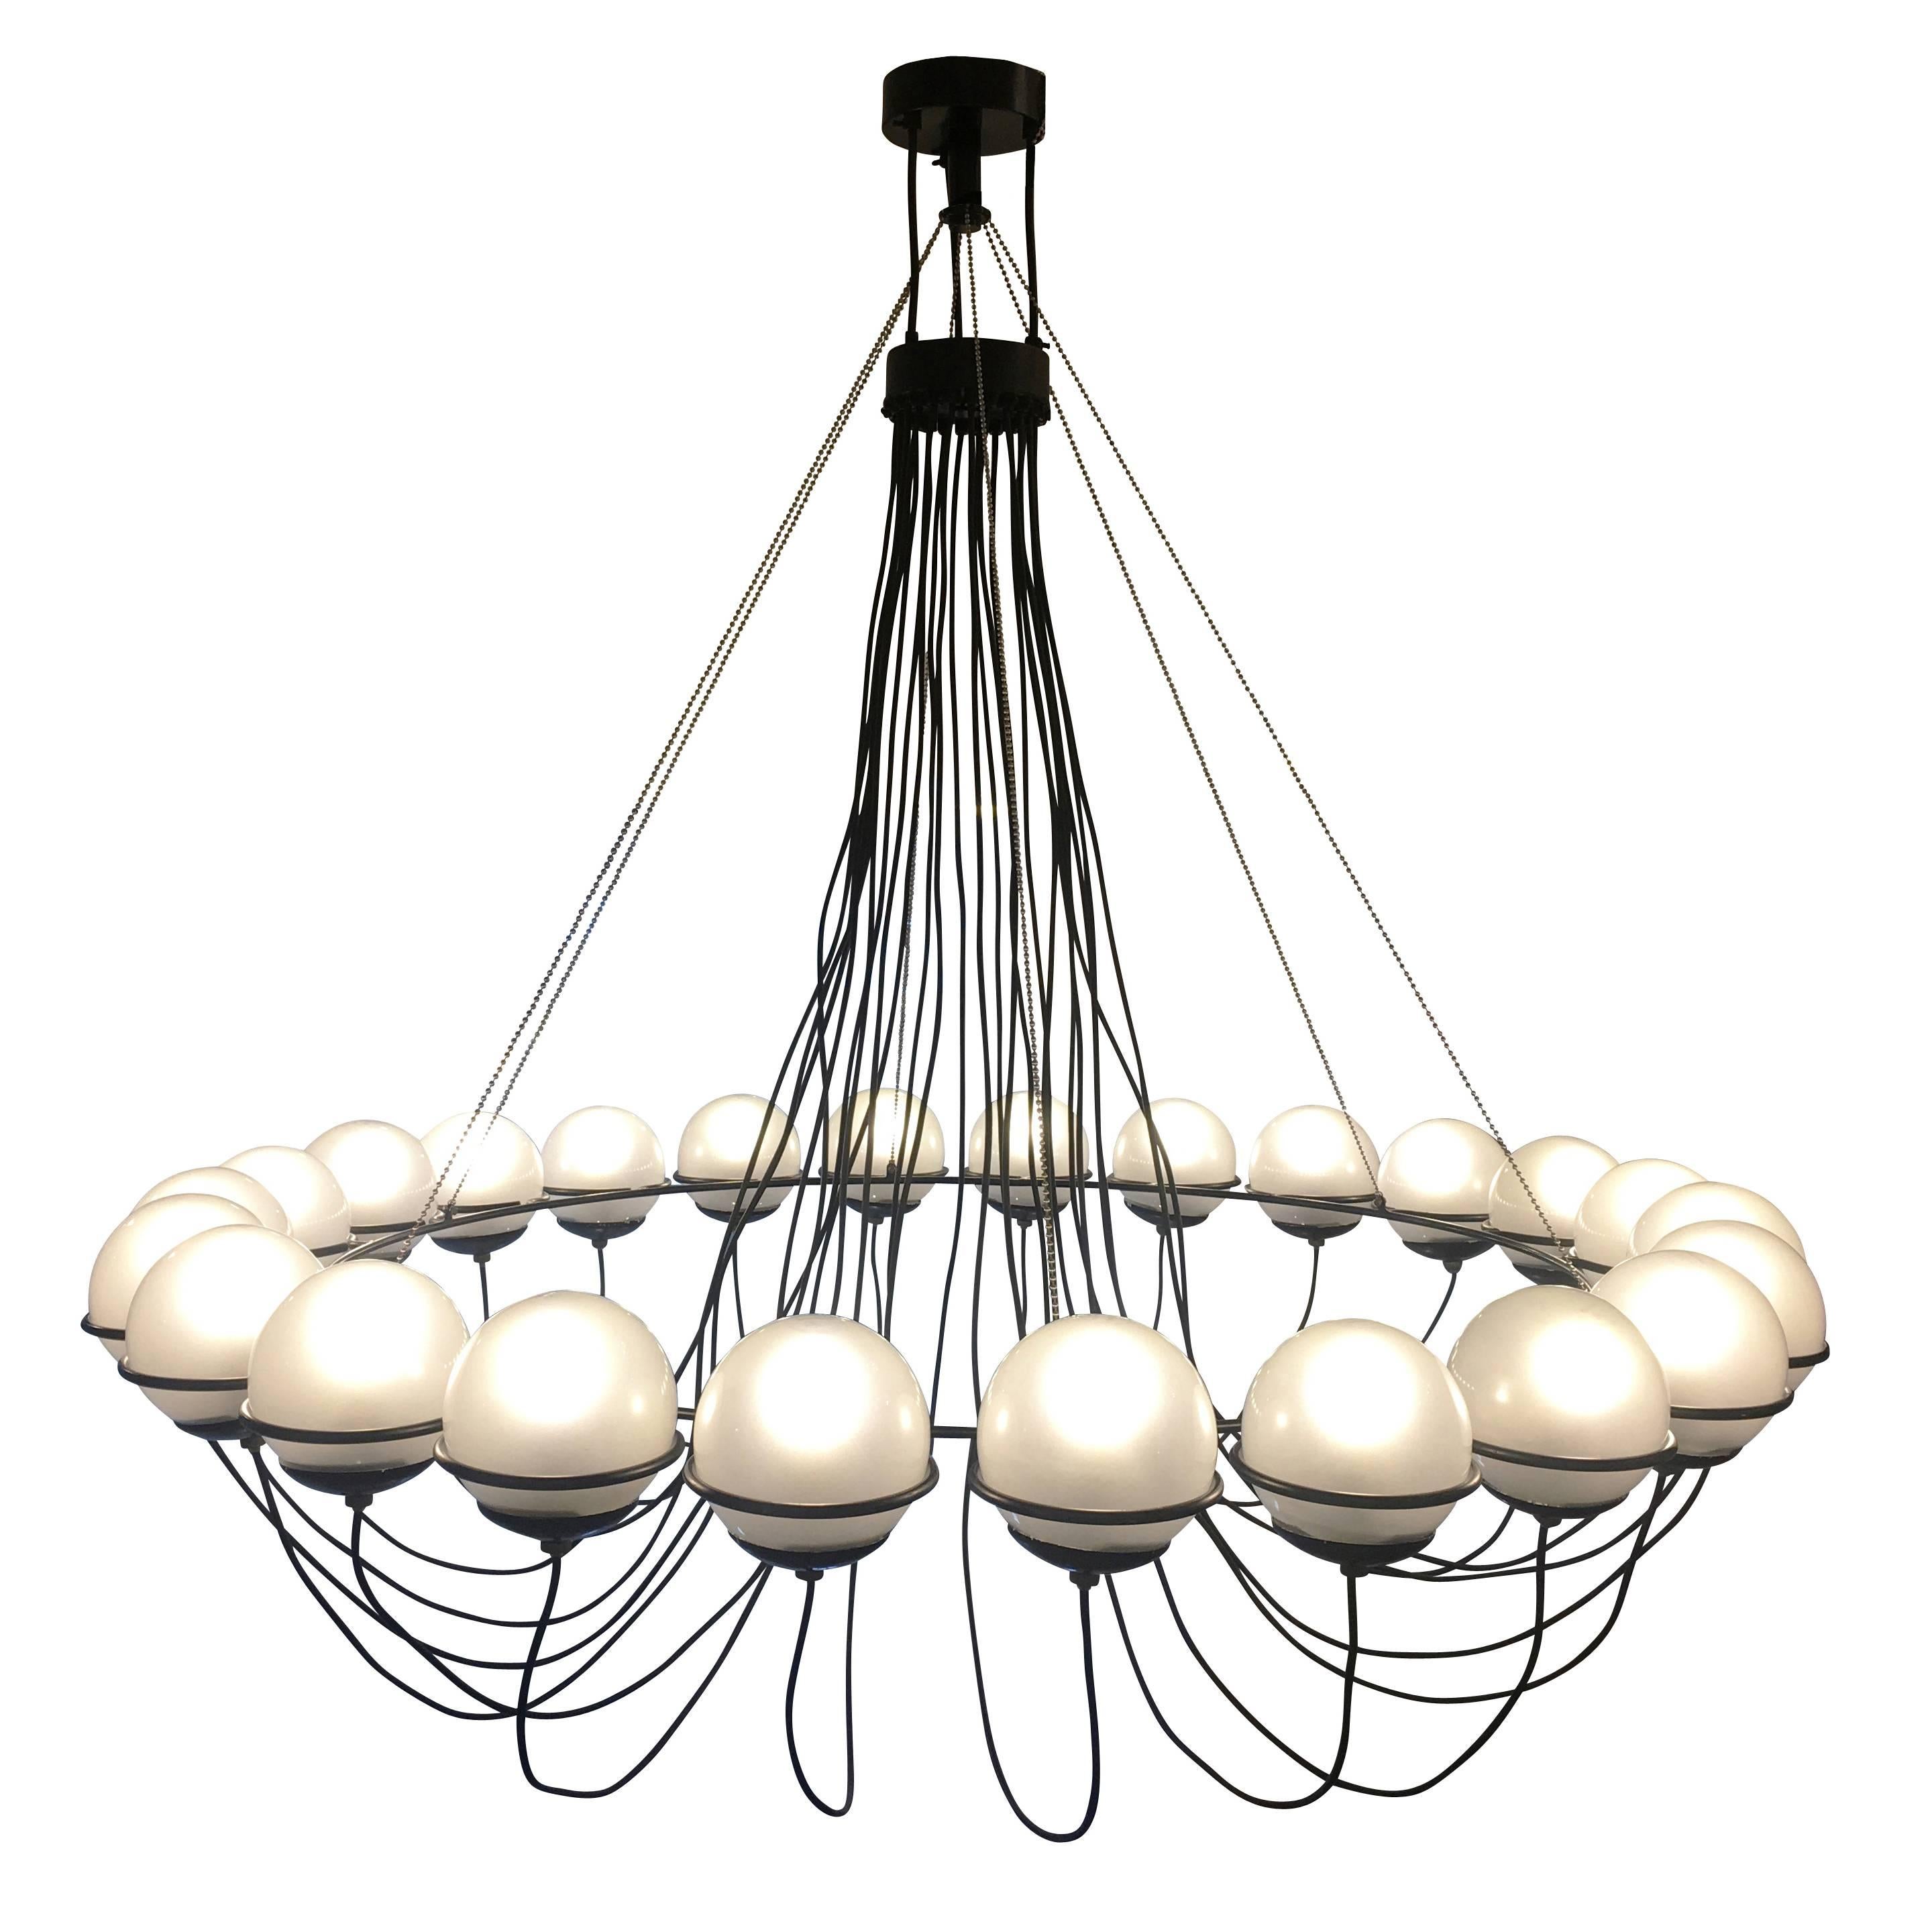 Large 24-Light Chandelier by Gino Sarfatti for Arteluce